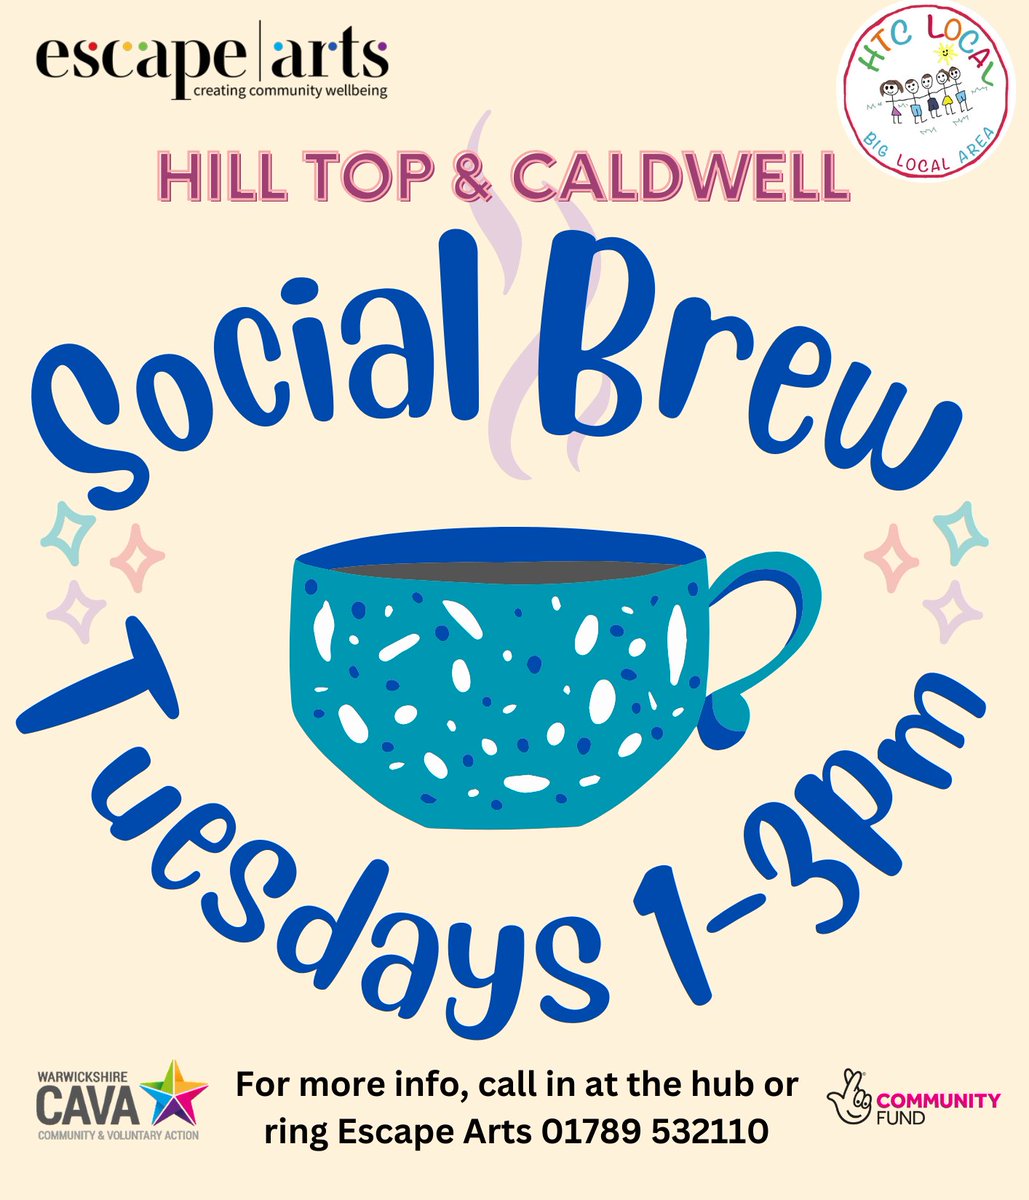 Escape Arts, in partnership with HTC Big Local, is delighted to throw open the doors of the community hub on Donnithorne Avenue on Tuesdays from 1 to 3pm & welcome residents of Hill Top & Caldwell to join us for a free cuppa & chat at the new Social Brew! @wcavaorg @HTCBigLocal